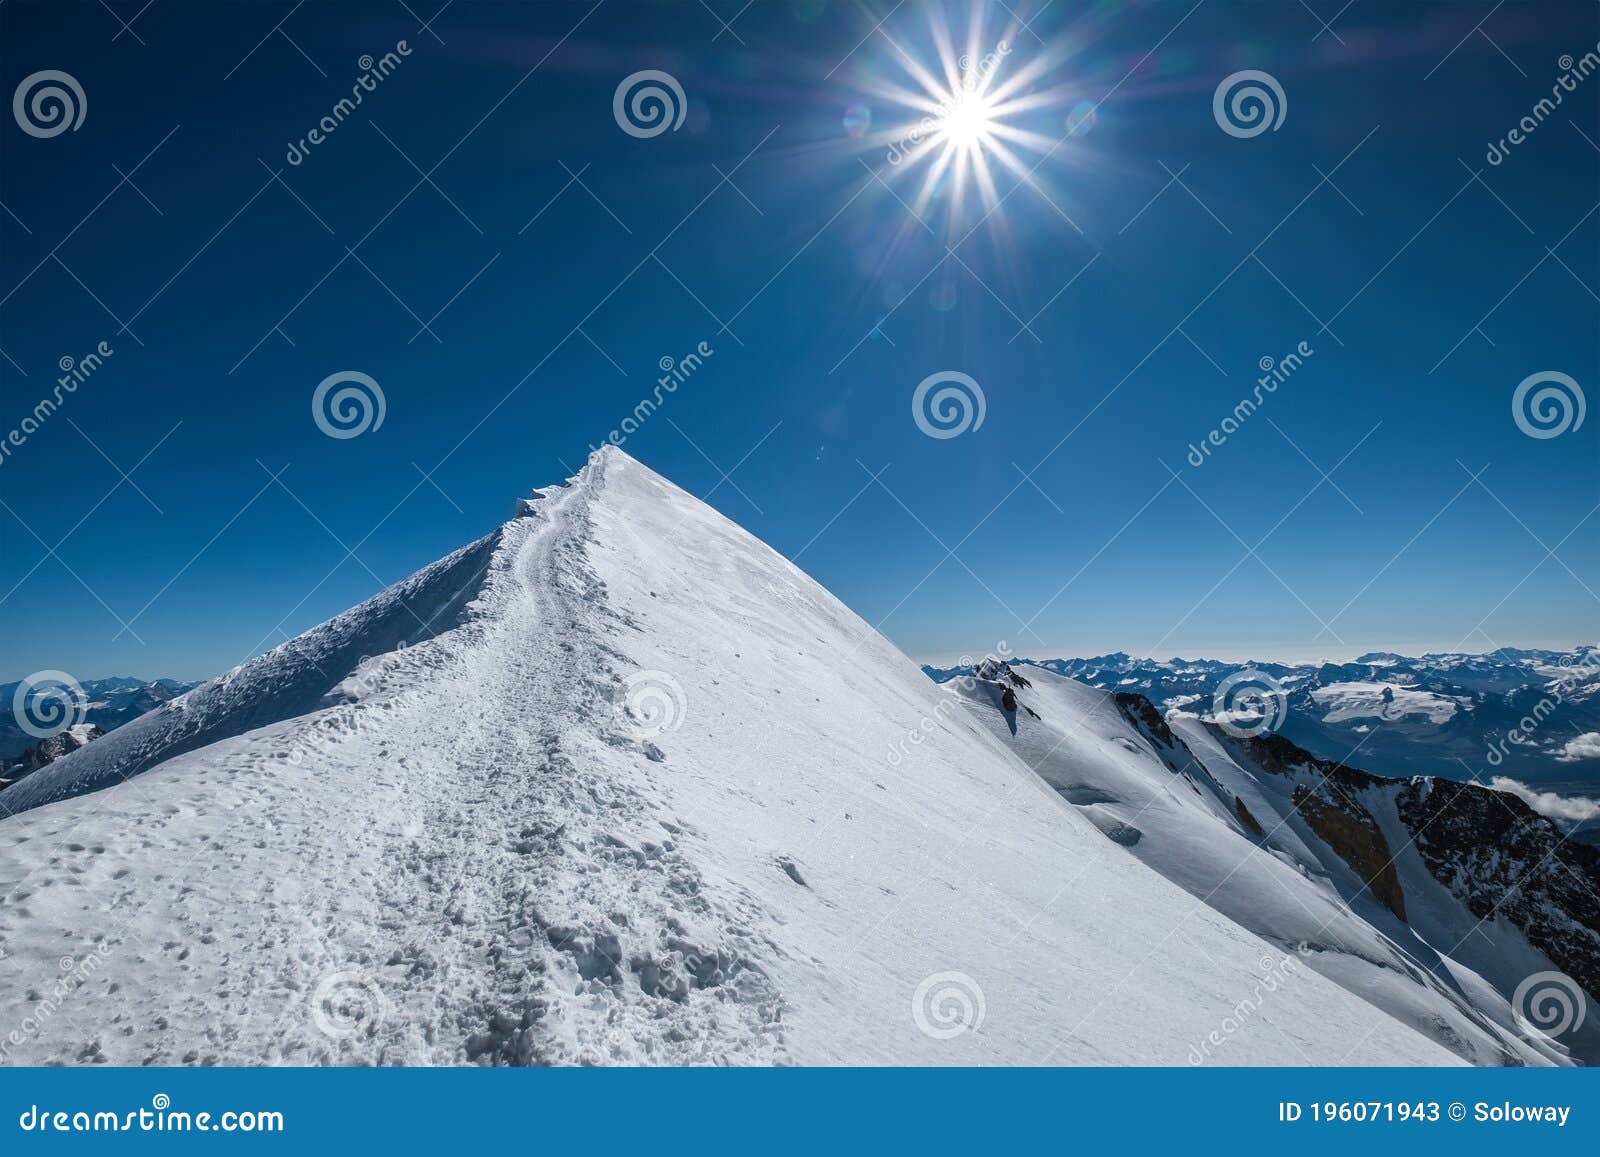 mont blanc monte bianco snowy 4808m summit wide angle view with surrounded french alps landscape with deep blue sky and bright